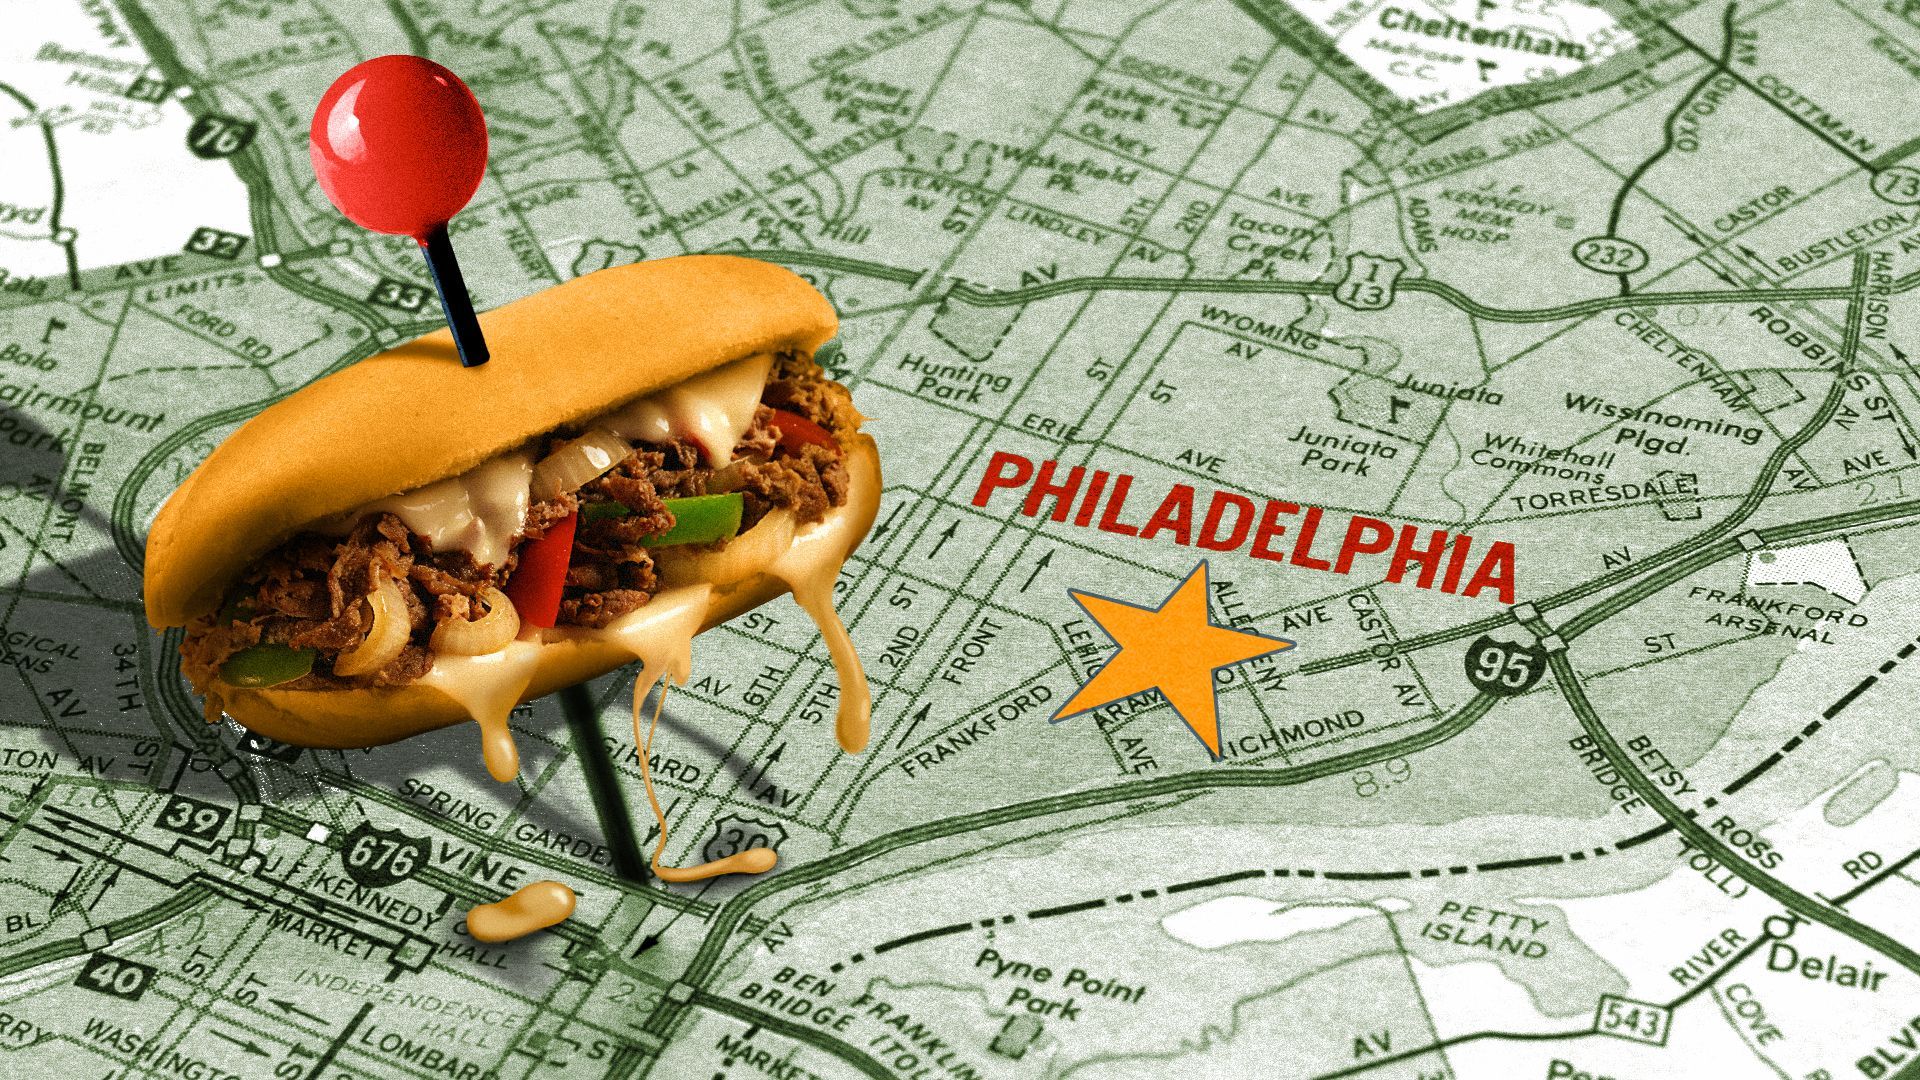 Illustration of a Philly cheesesteak sandwich pinned to a map of Philadelphia.